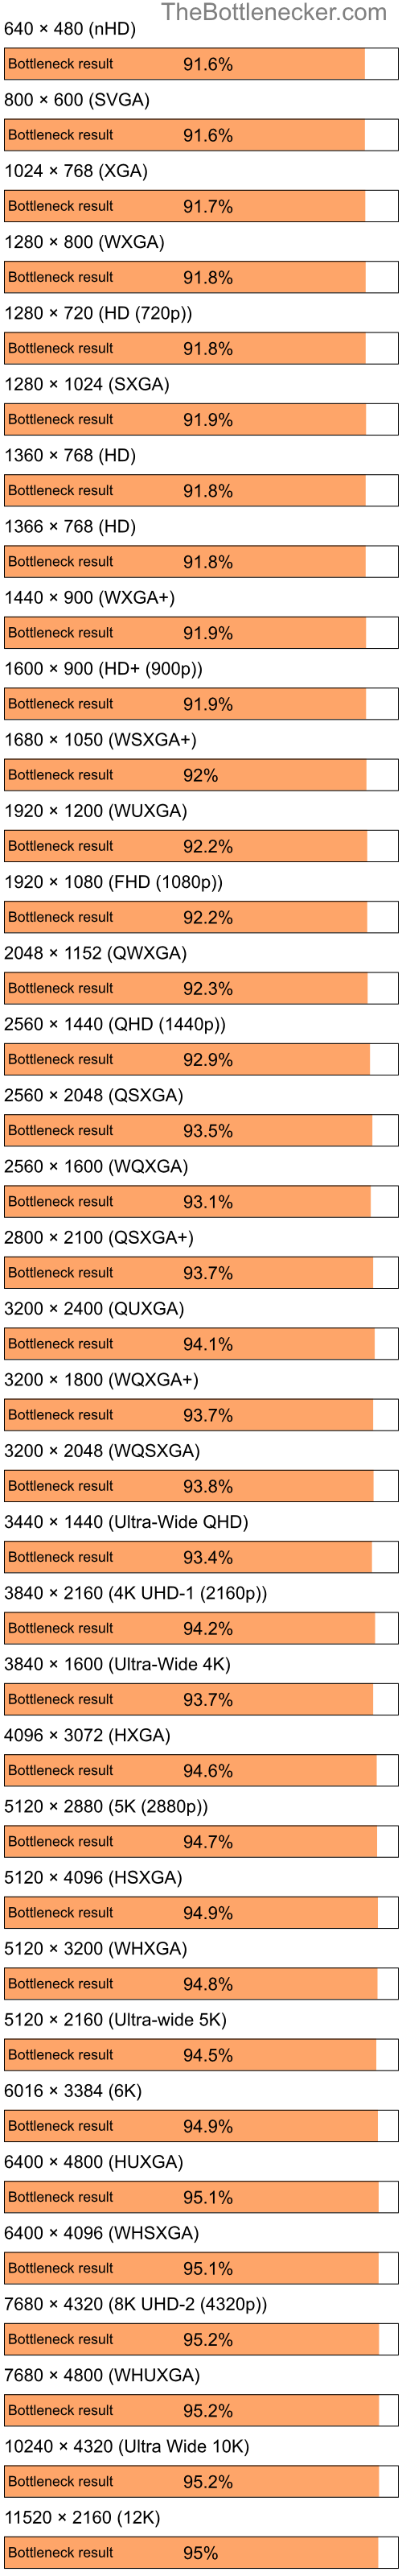 Bottleneck results by resolution for Intel Pentium 4 and NVIDIA GeForce4 MX 440 in Graphic Card Intense Tasks